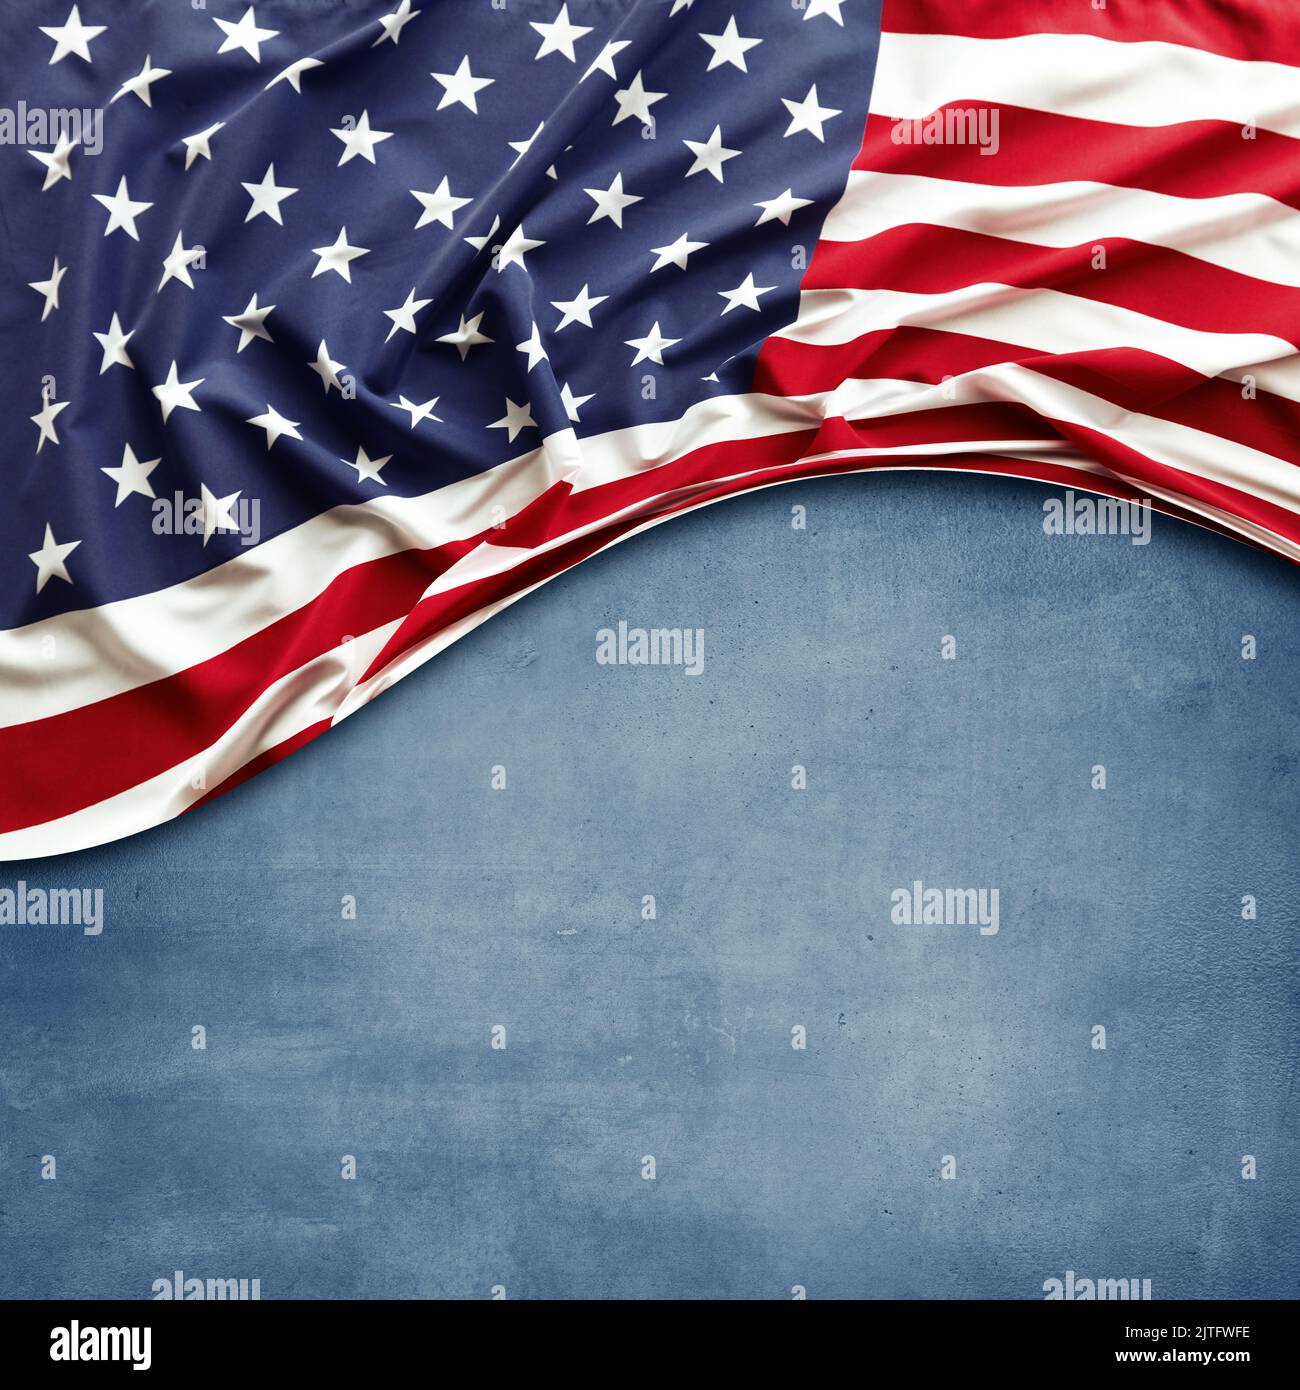 American flag on blue background Stock Photo